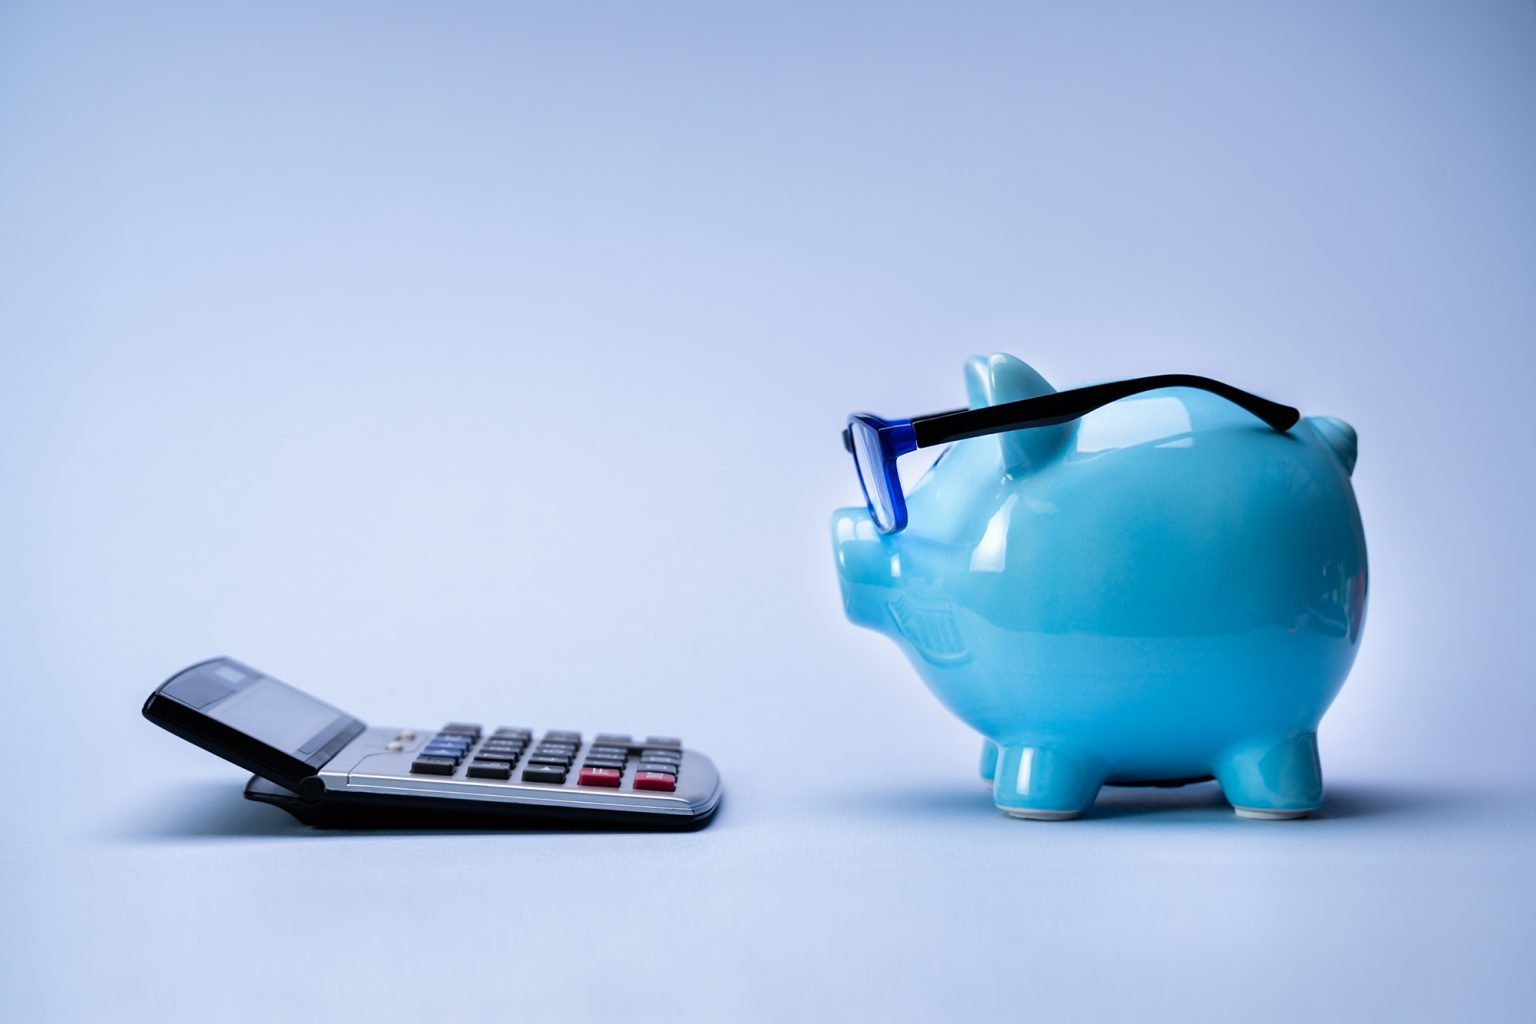 Piggy bank wearing eye glasses facing a calculator on a blue background